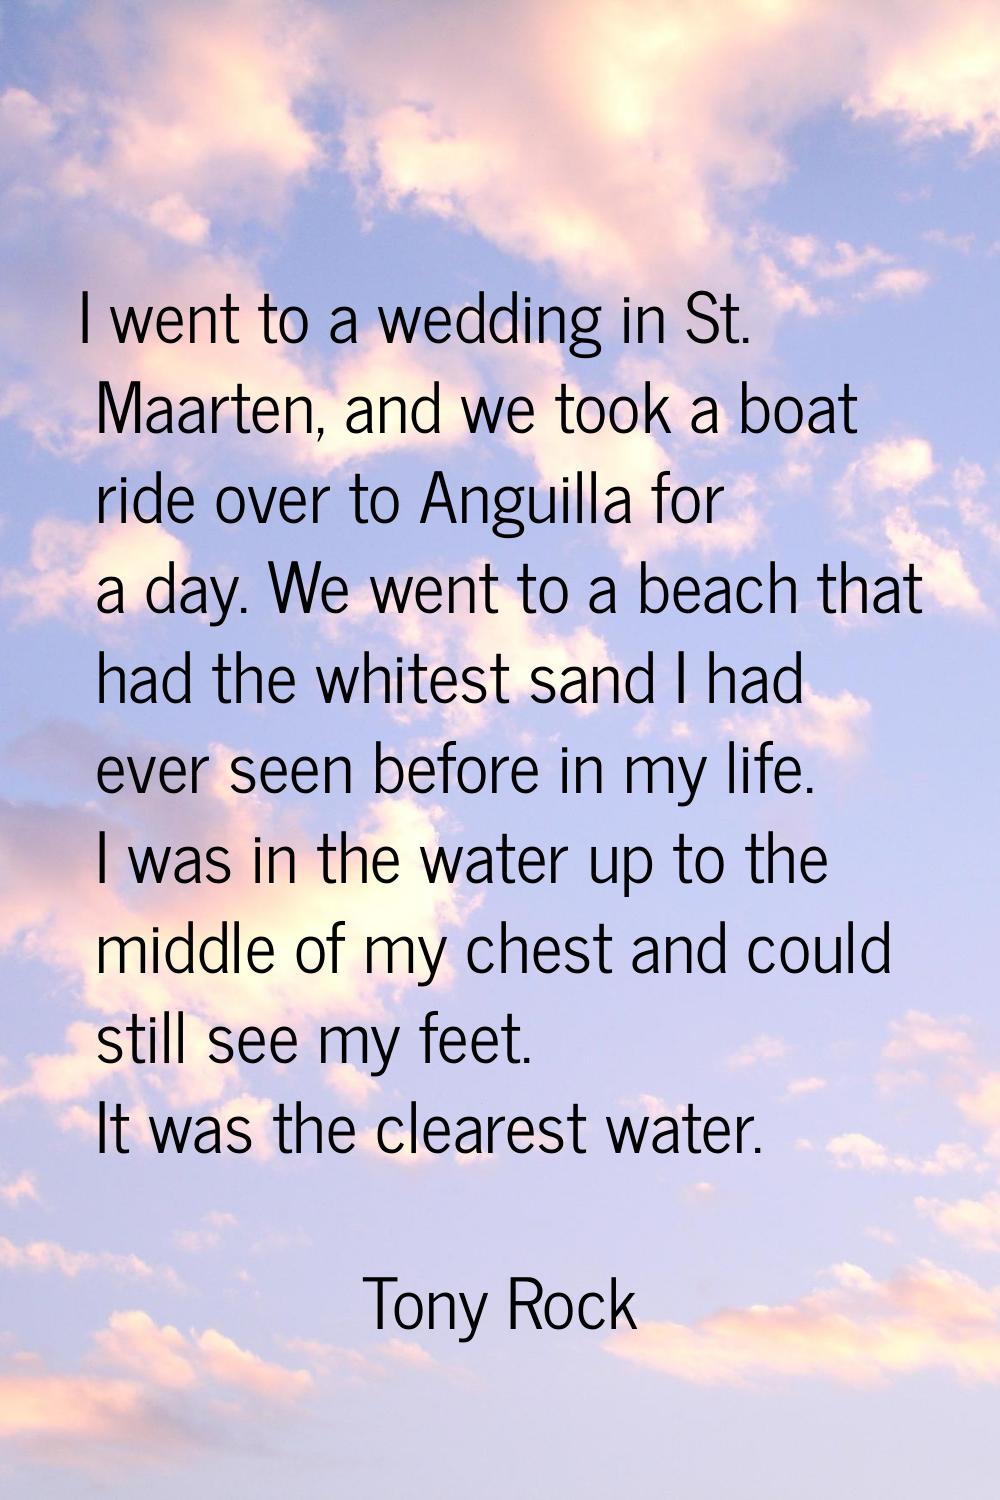 I went to a wedding in St. Maarten, and we took a boat ride over to Anguilla for a day. We went to 